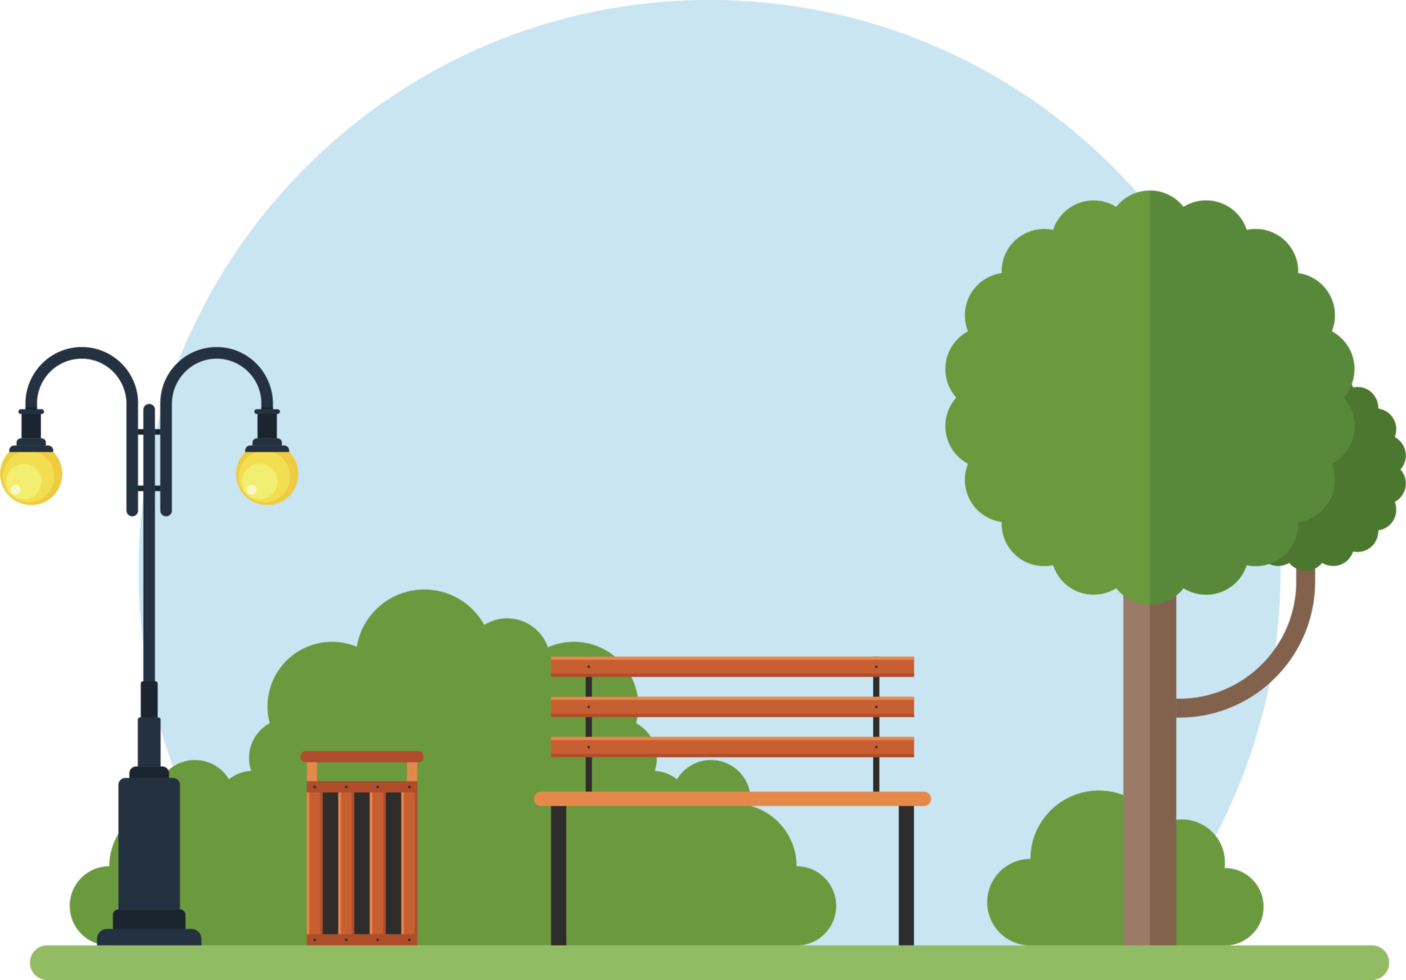 Tree, bench, lamp and trash can in the park vector illustration png